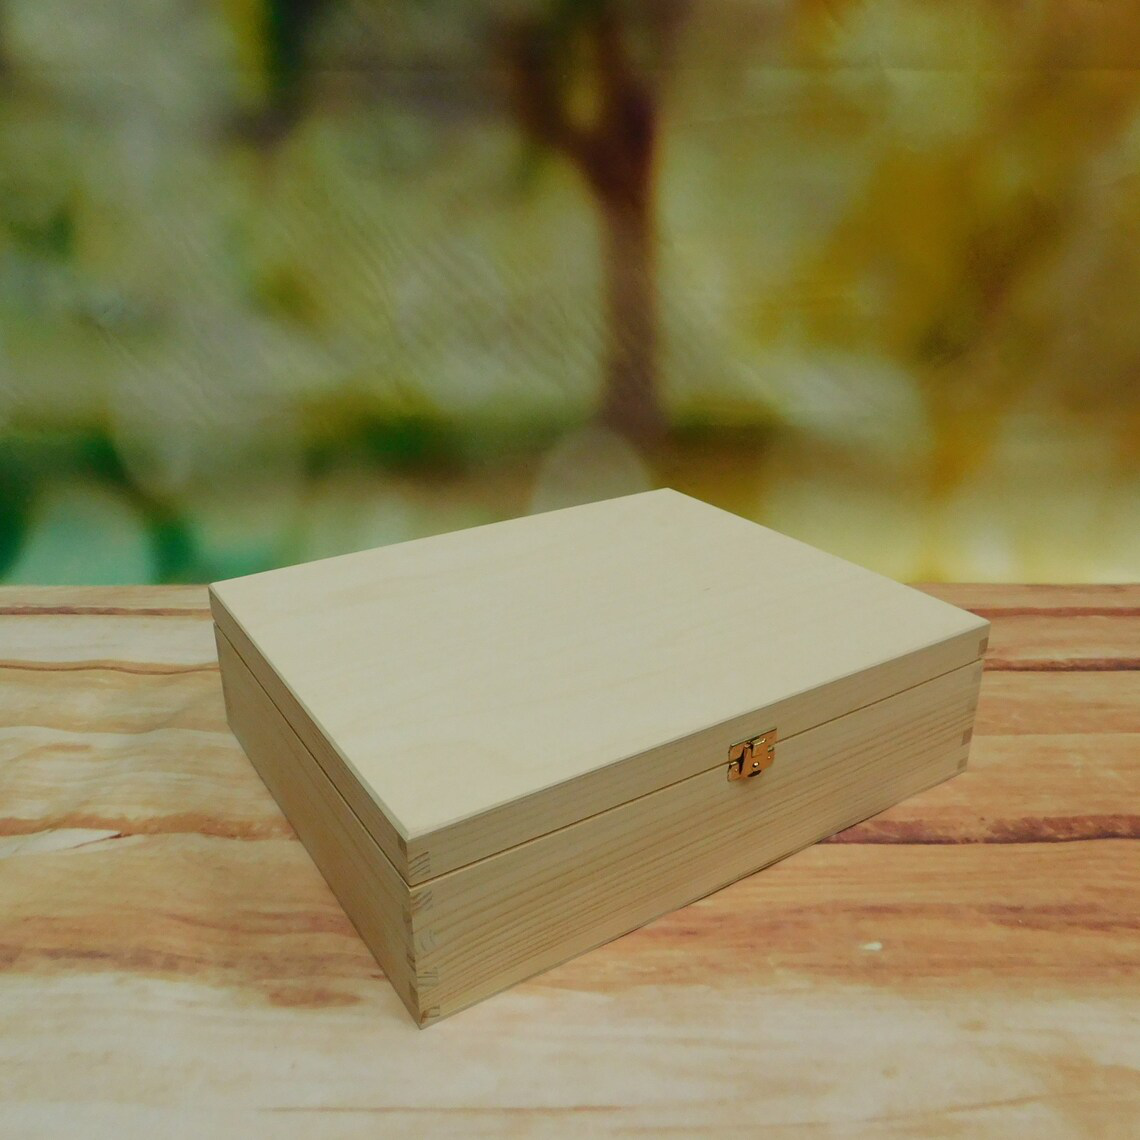 Plain Wooden Box With A Divider For 3 Wine Bottles